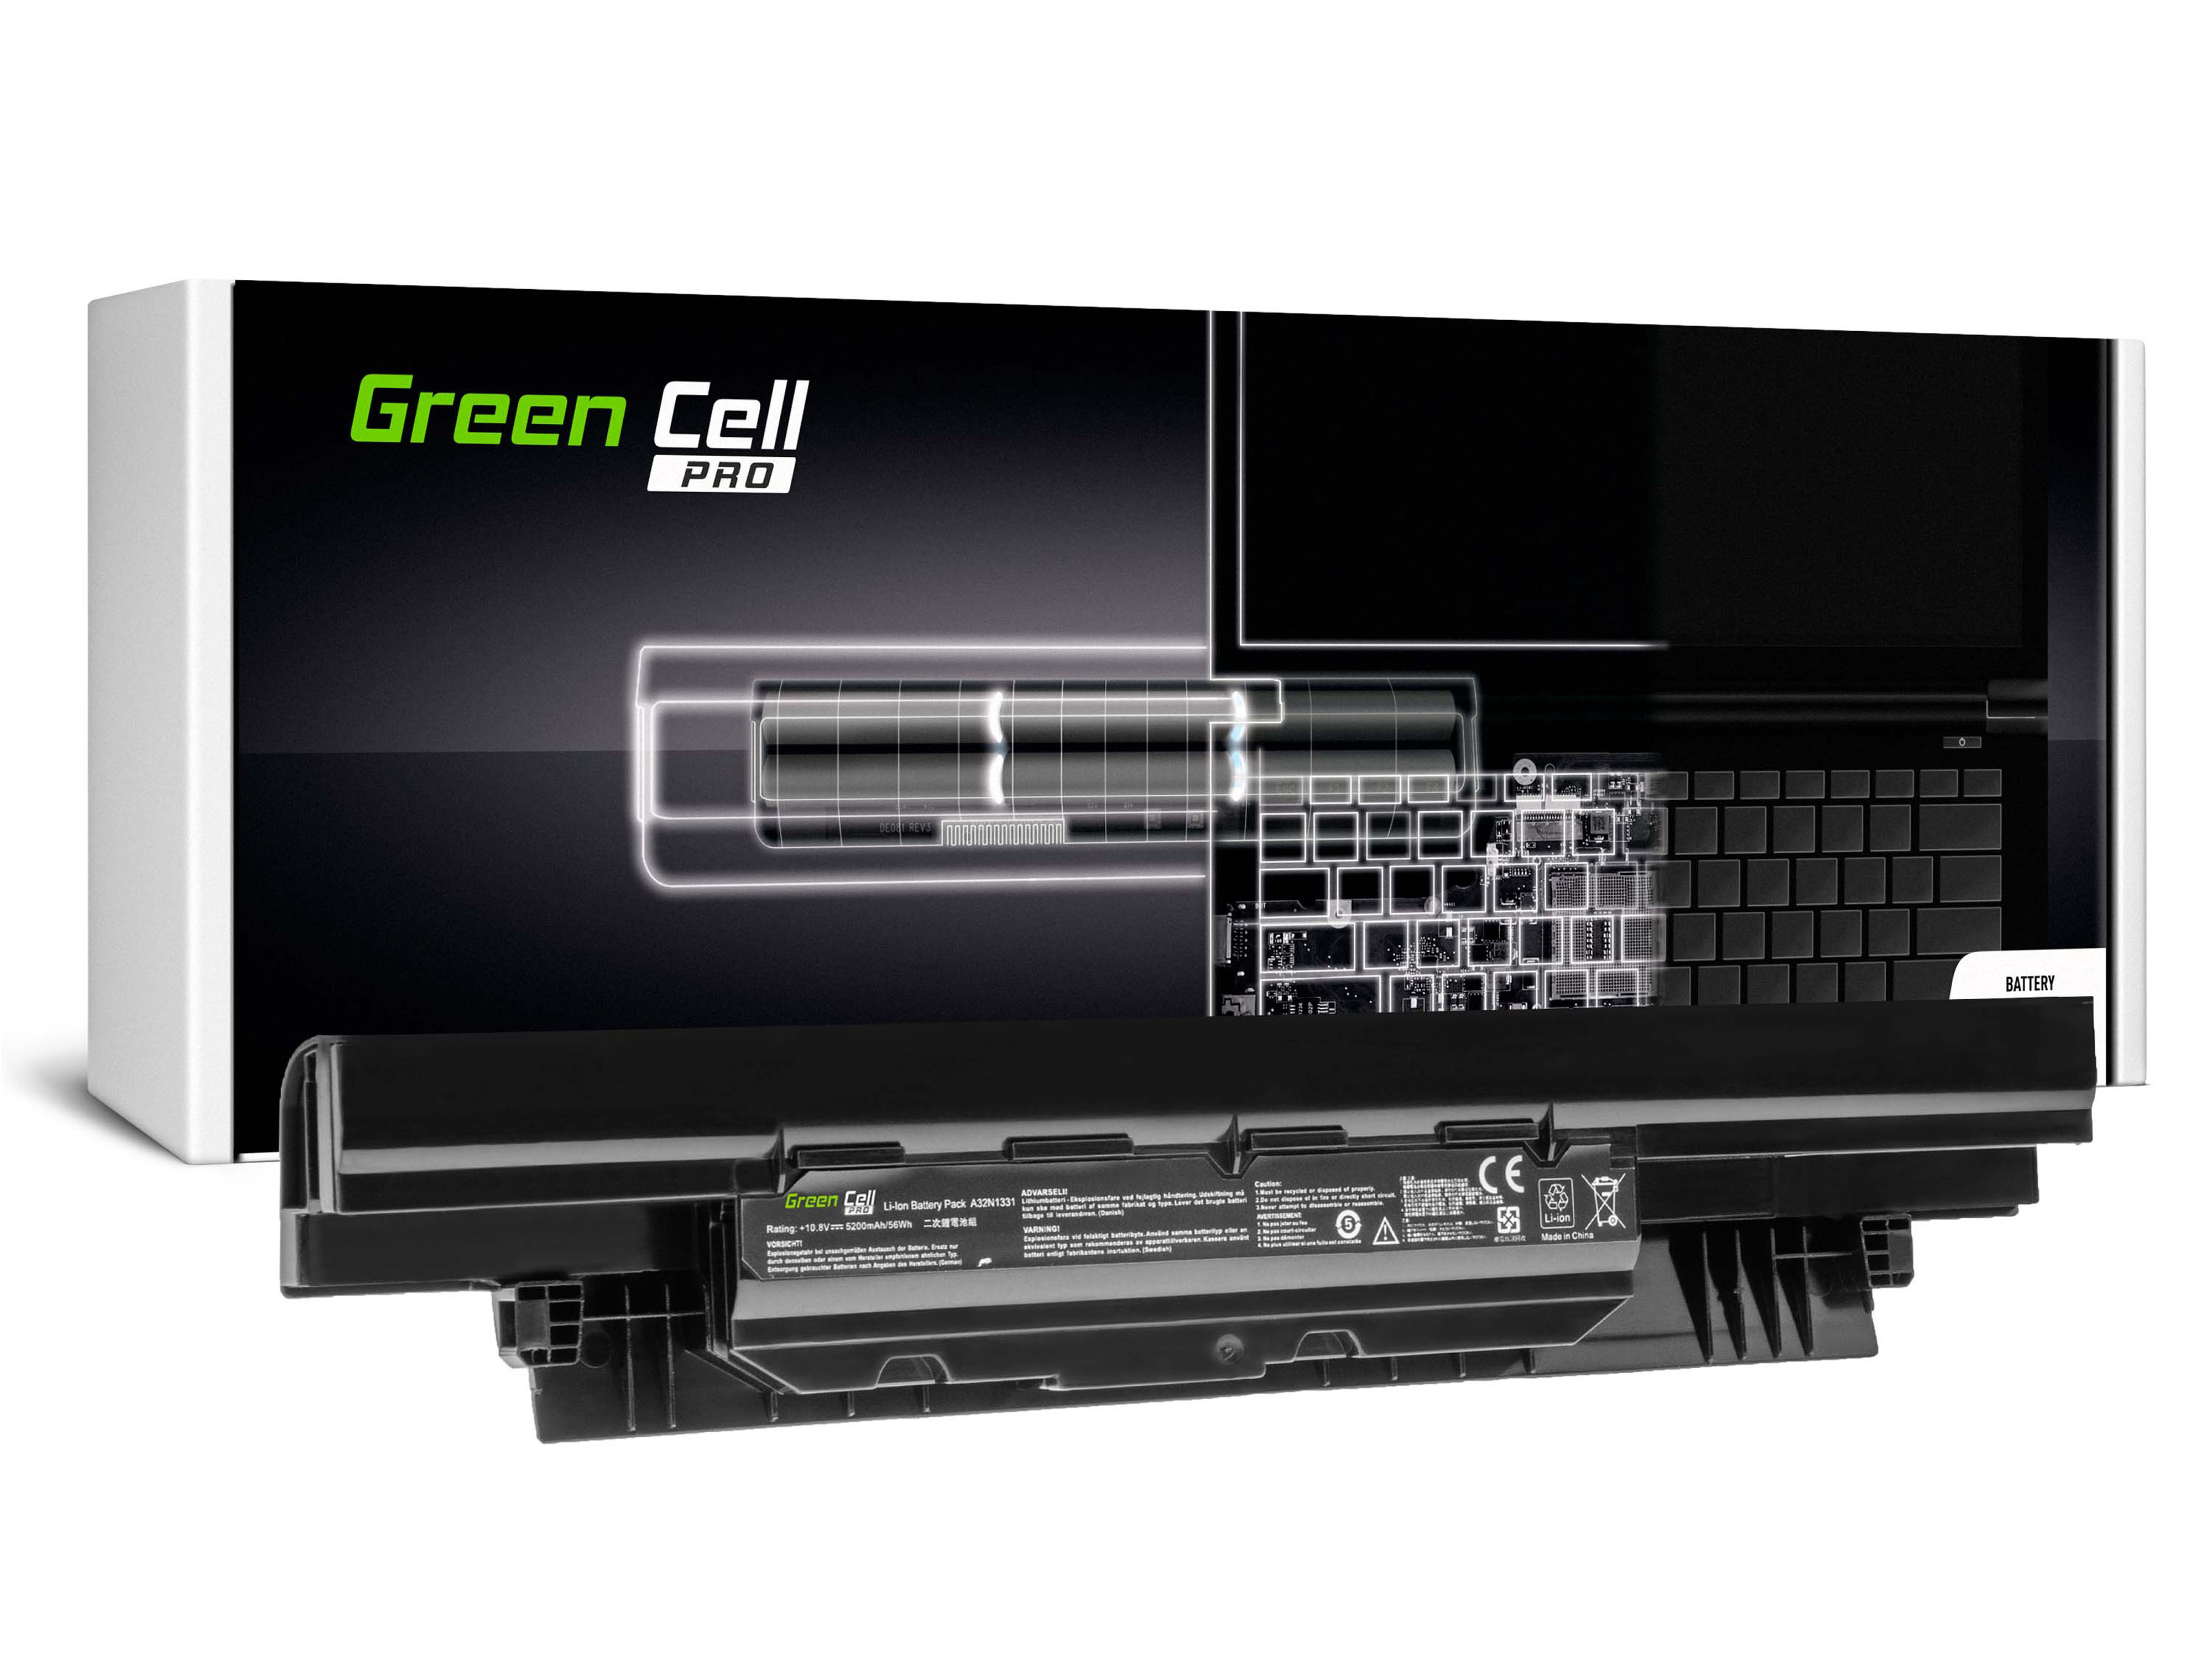 Green Cell AS103PRO Baterie Asus A32N1331 pro Asis PU551/PU551J/PU551JA/PU551JD/PU551L/PU551LD/A32N1331 5200mAh Li-ion